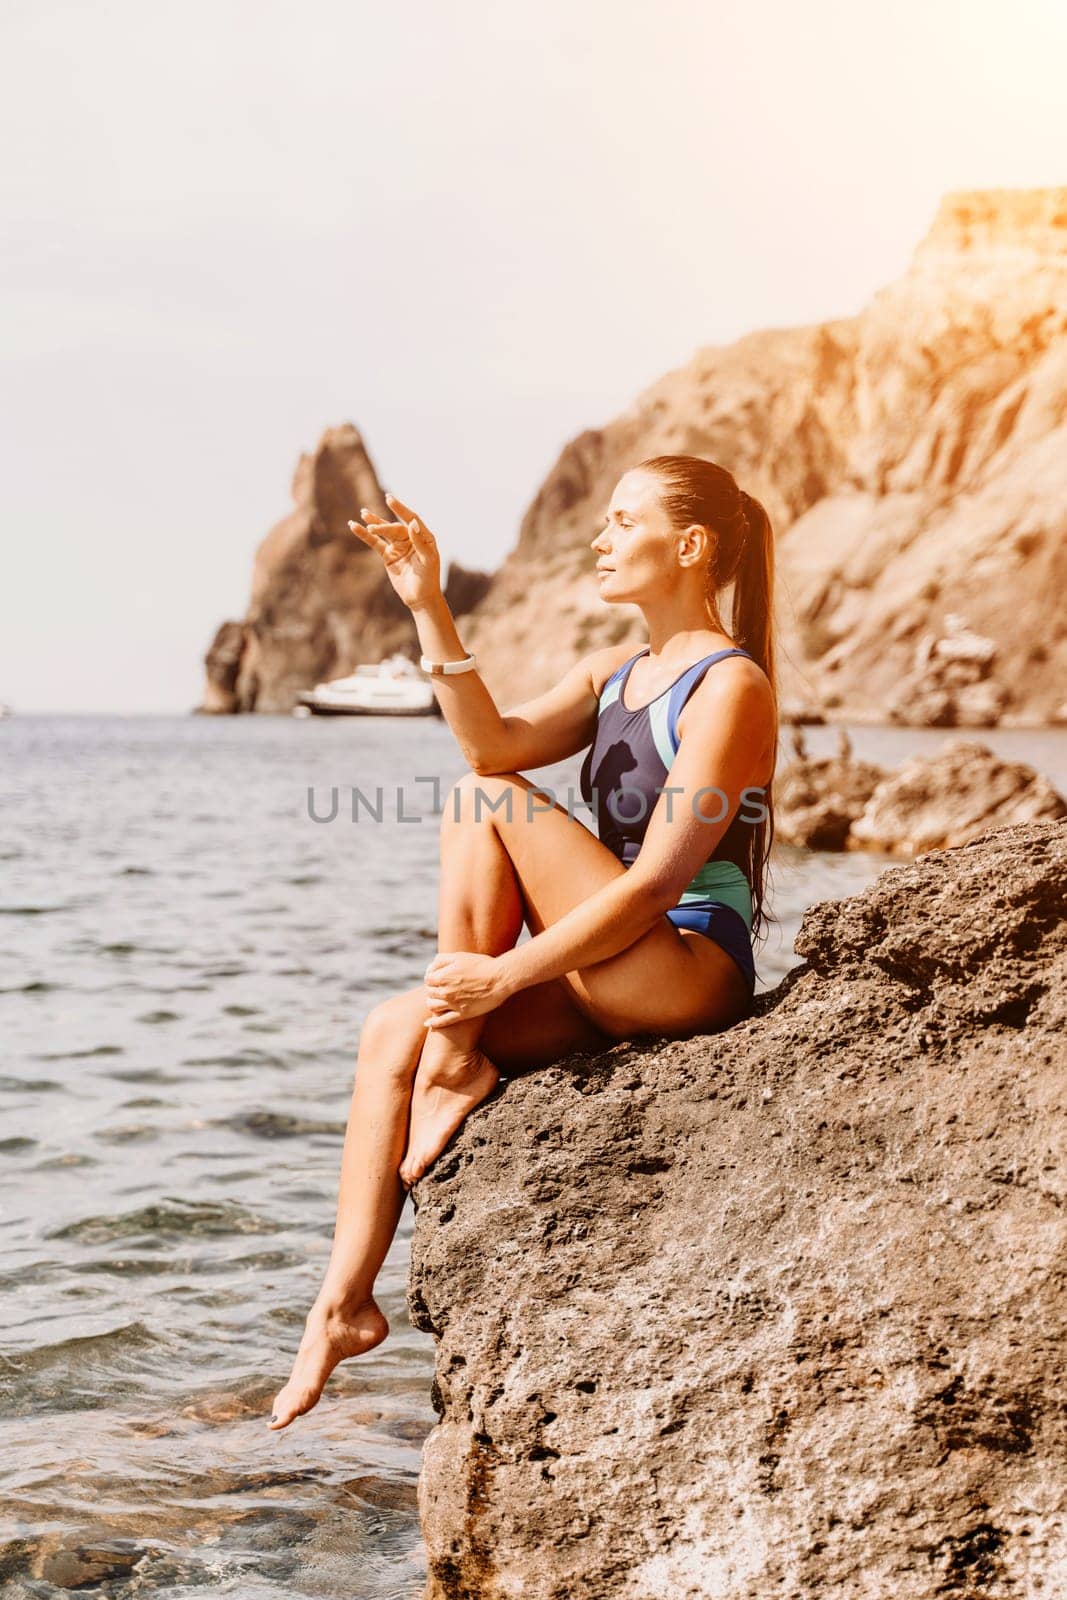 Woman travel summer sea. A happy tourist in a blue bikini enjoying the scenic view of the sea and volcanic mountains while taking pictures to capture the memories of her travel adventure